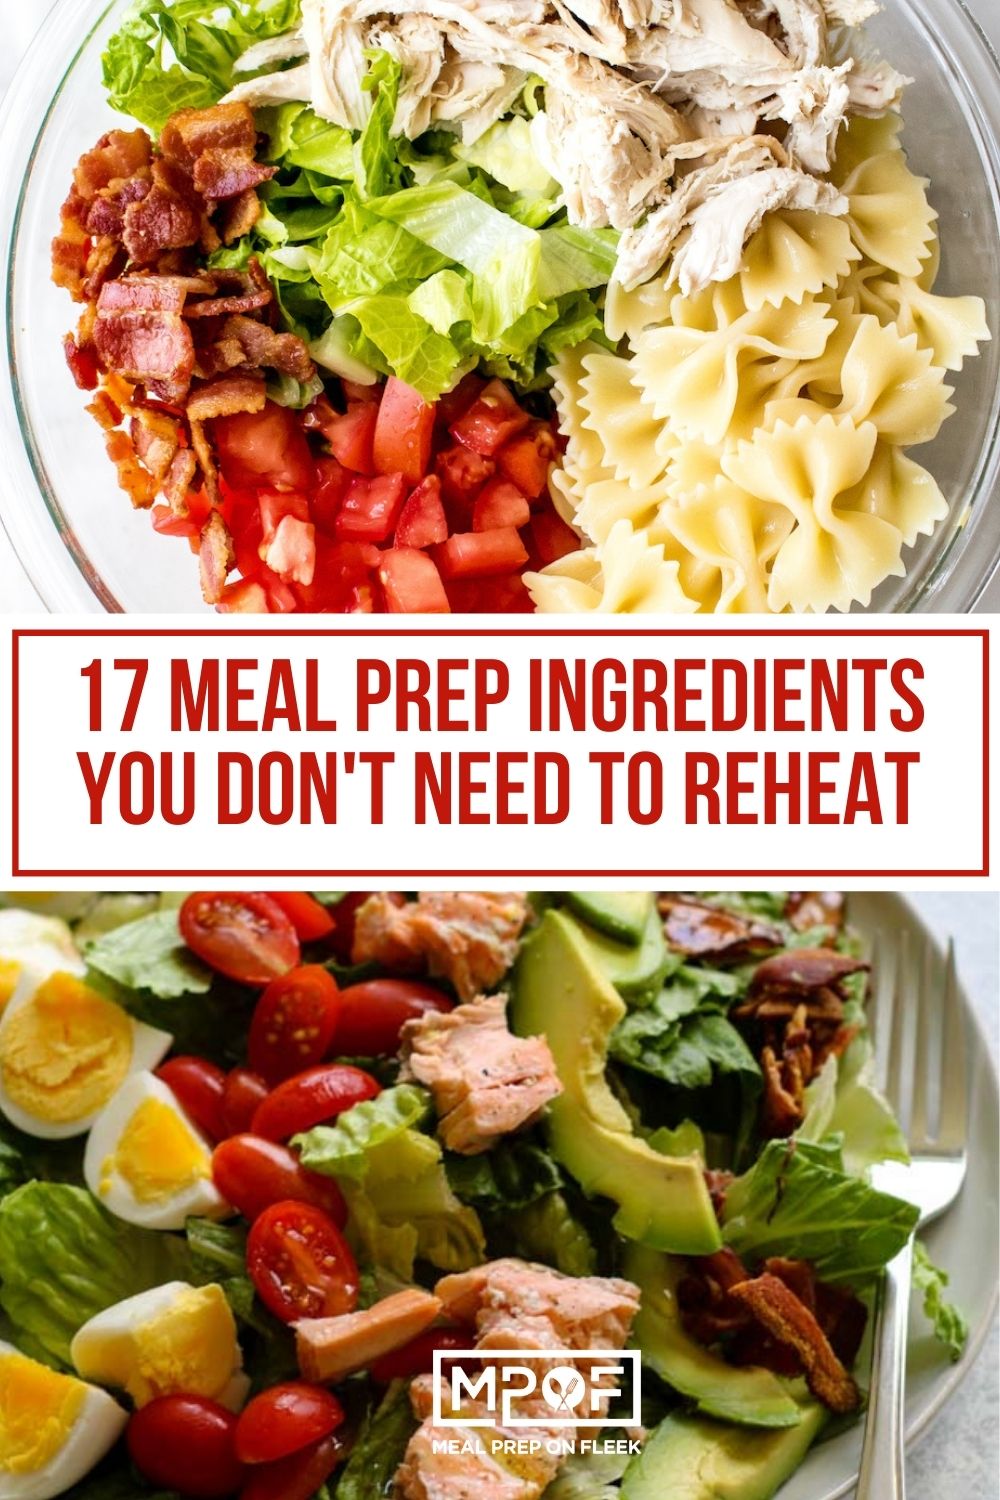 17 Meal Prep Ingredients You Don't Need to Reheat